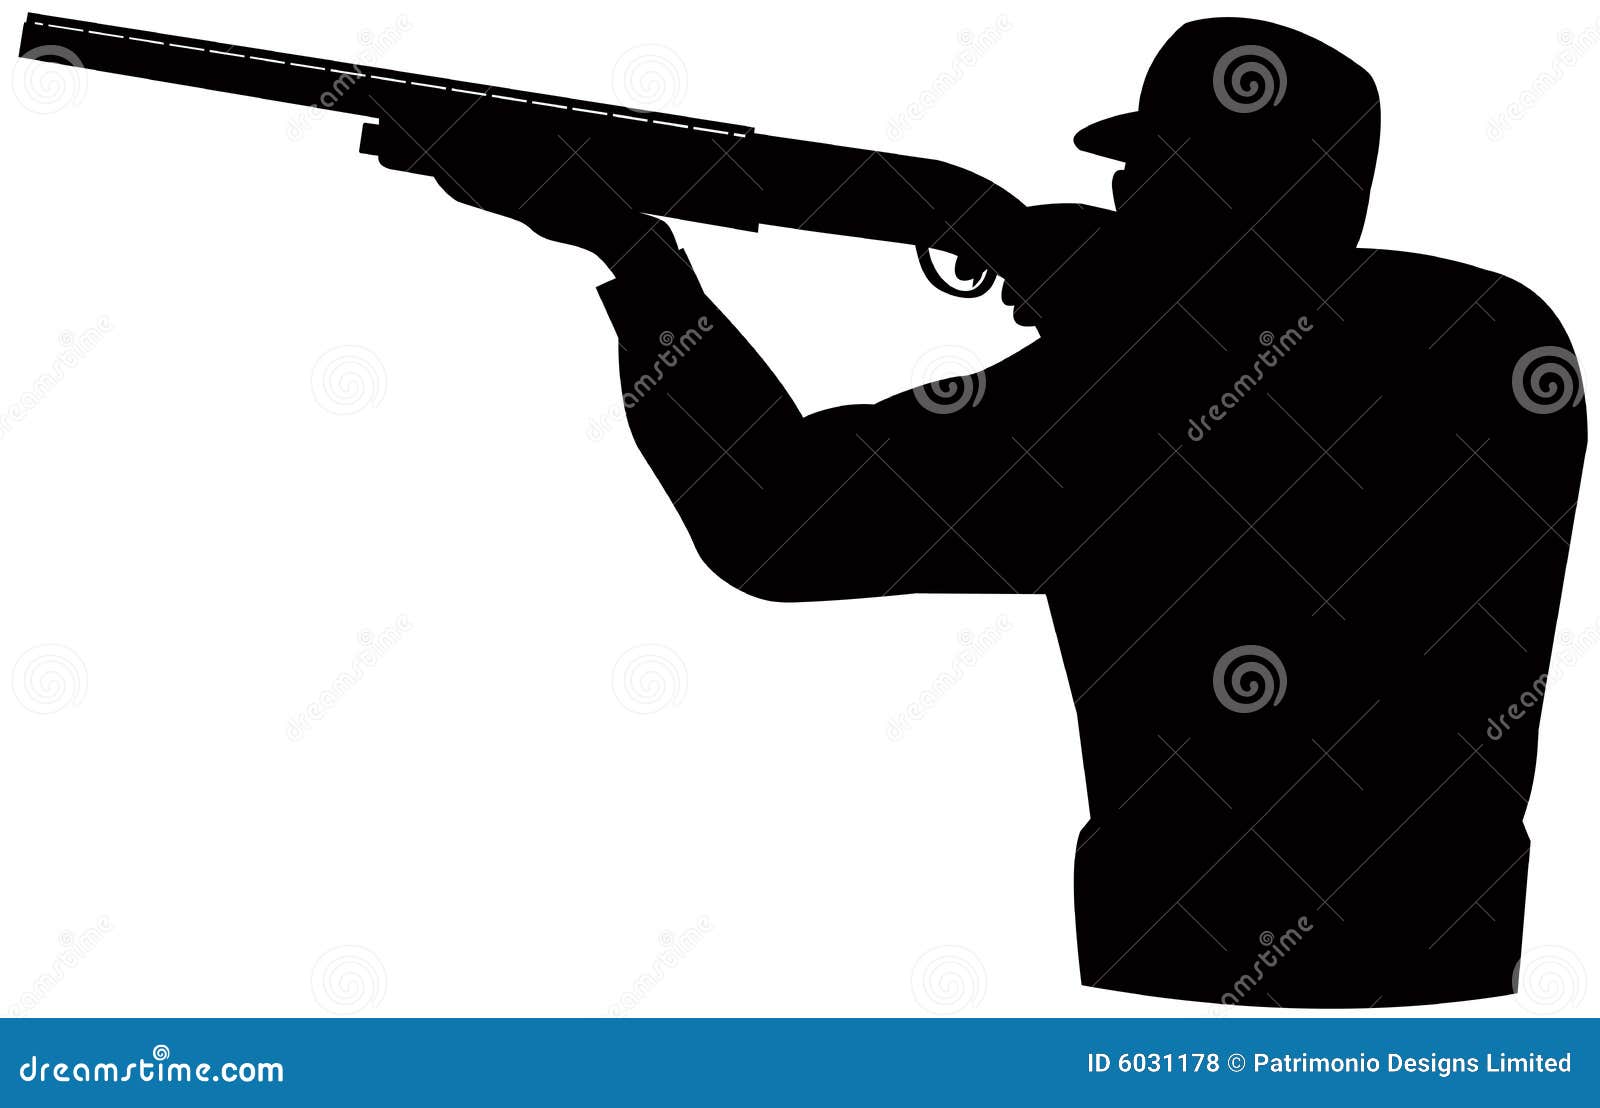 free shooting sports clipart - photo #47